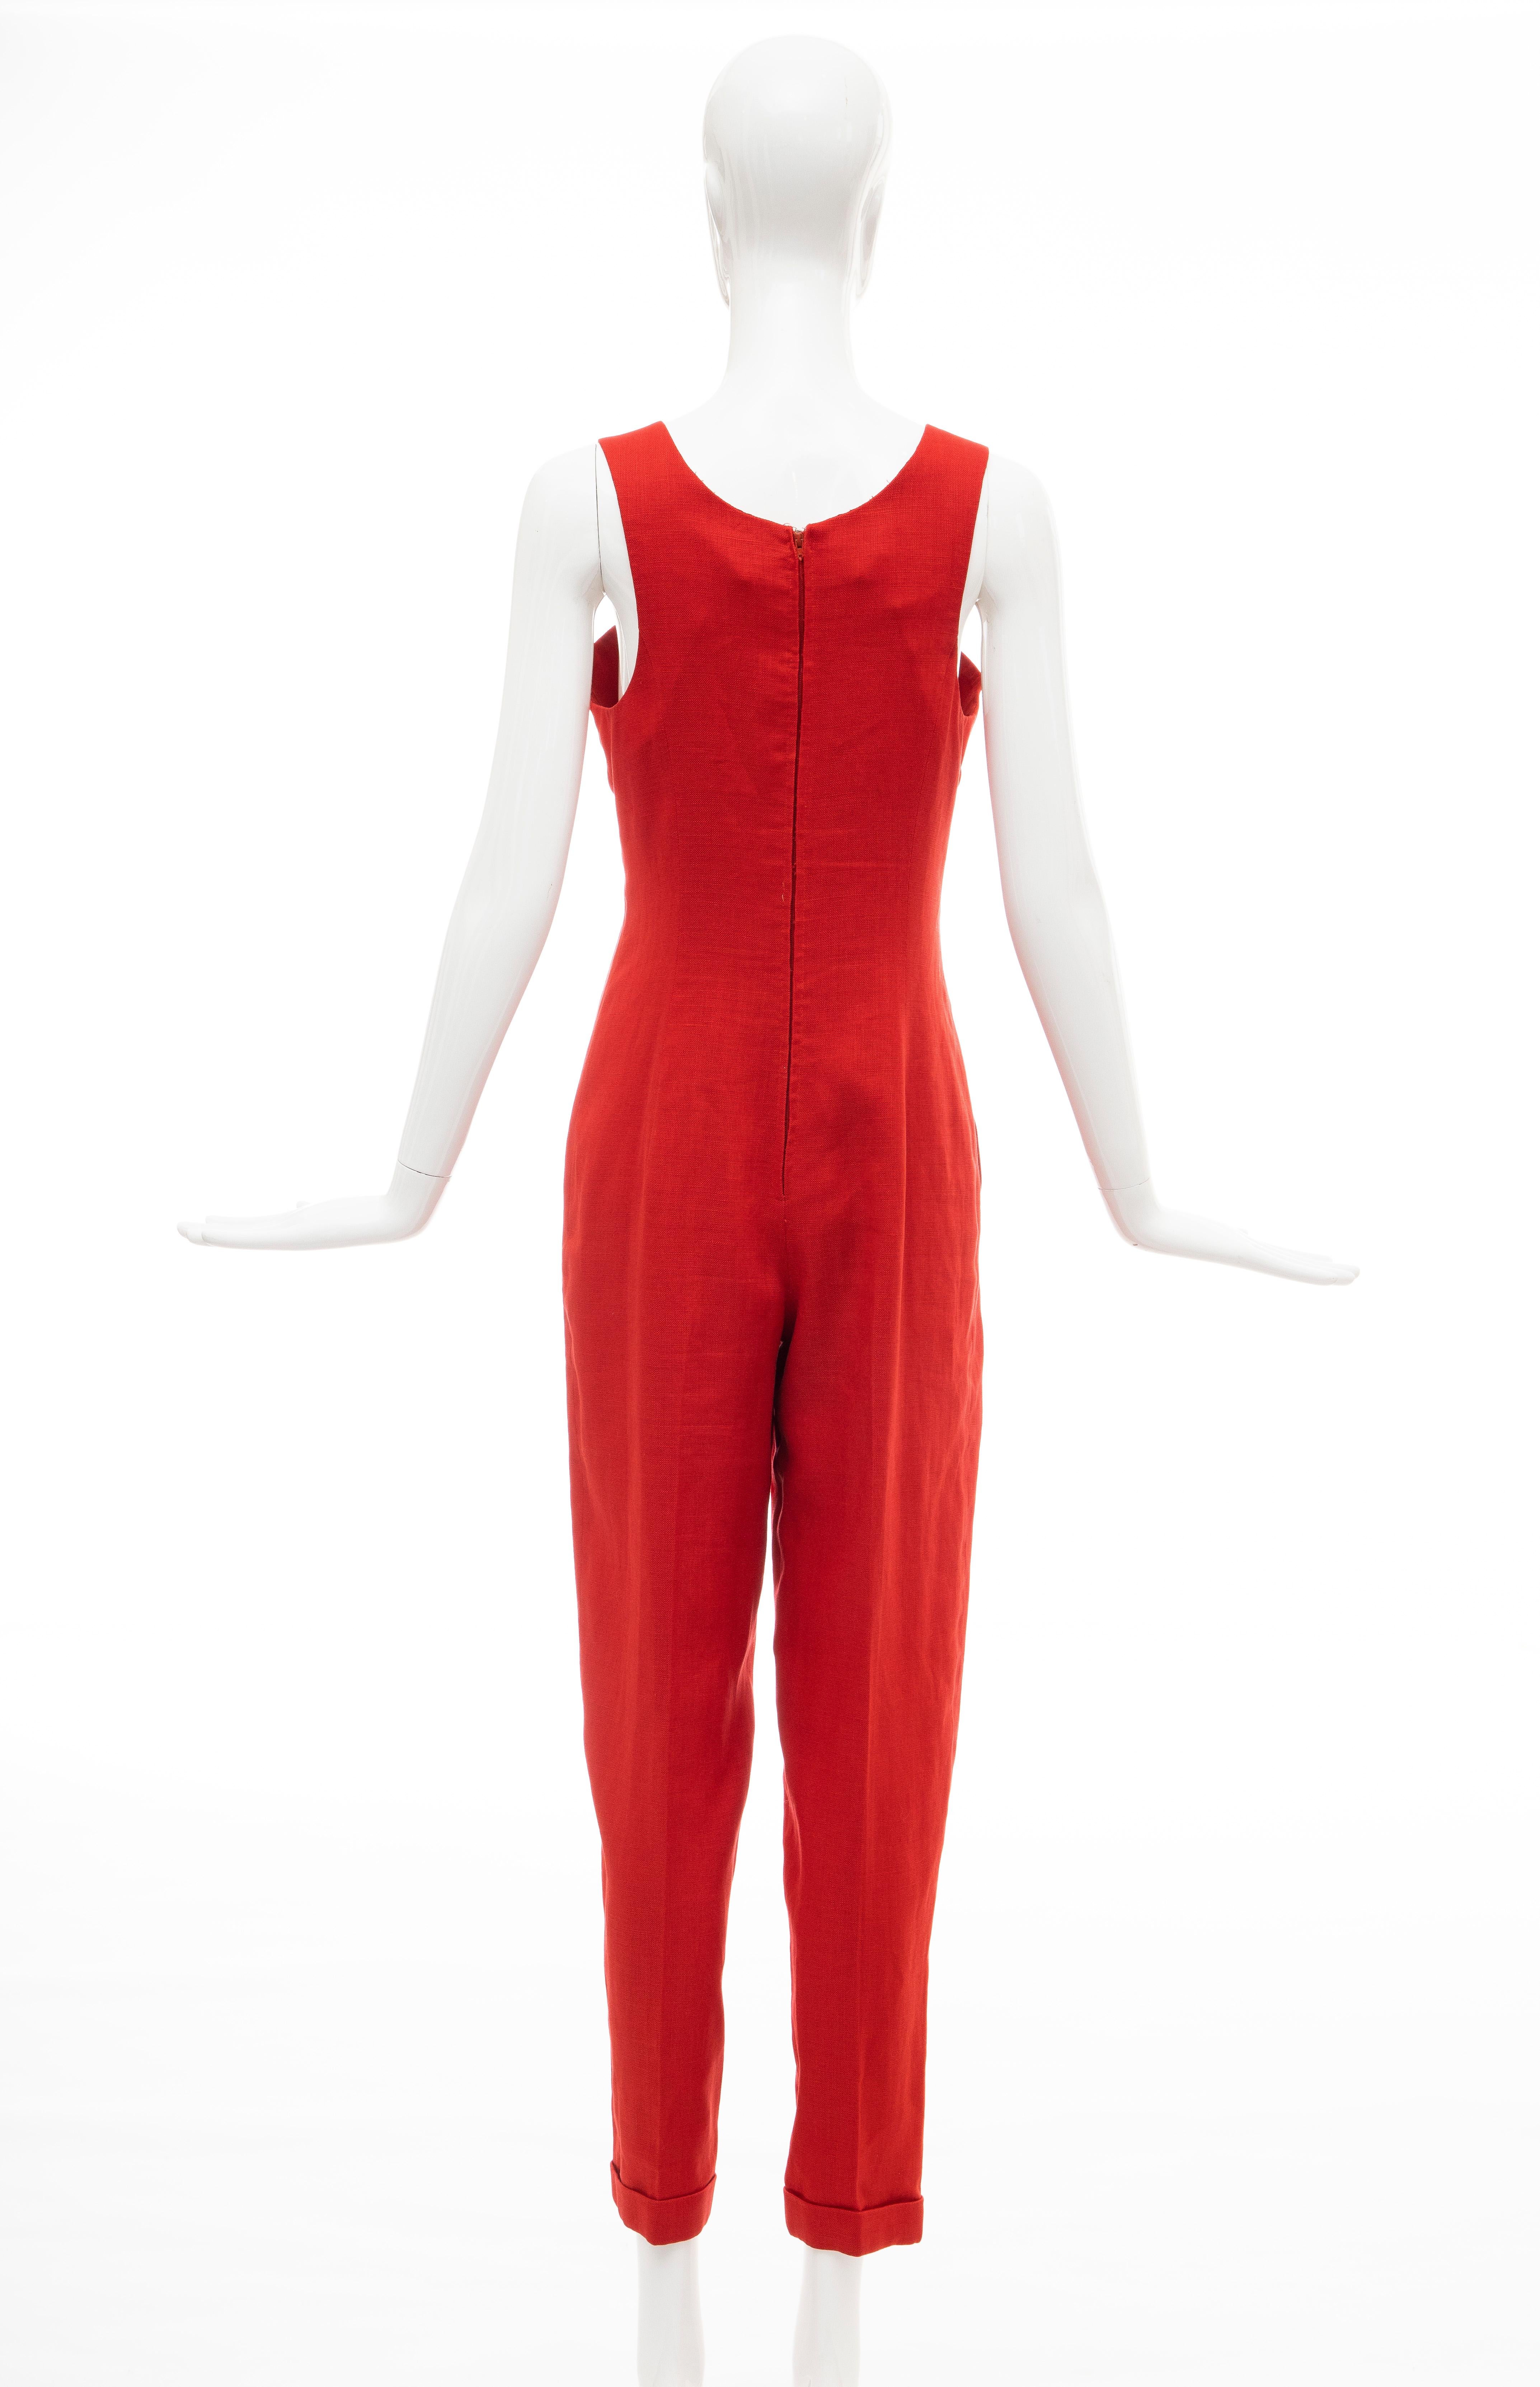 Geoffrey Beene Red Linen Jumpsuit Silk Lined With Jacket, Circa: 1970's For Sale 4